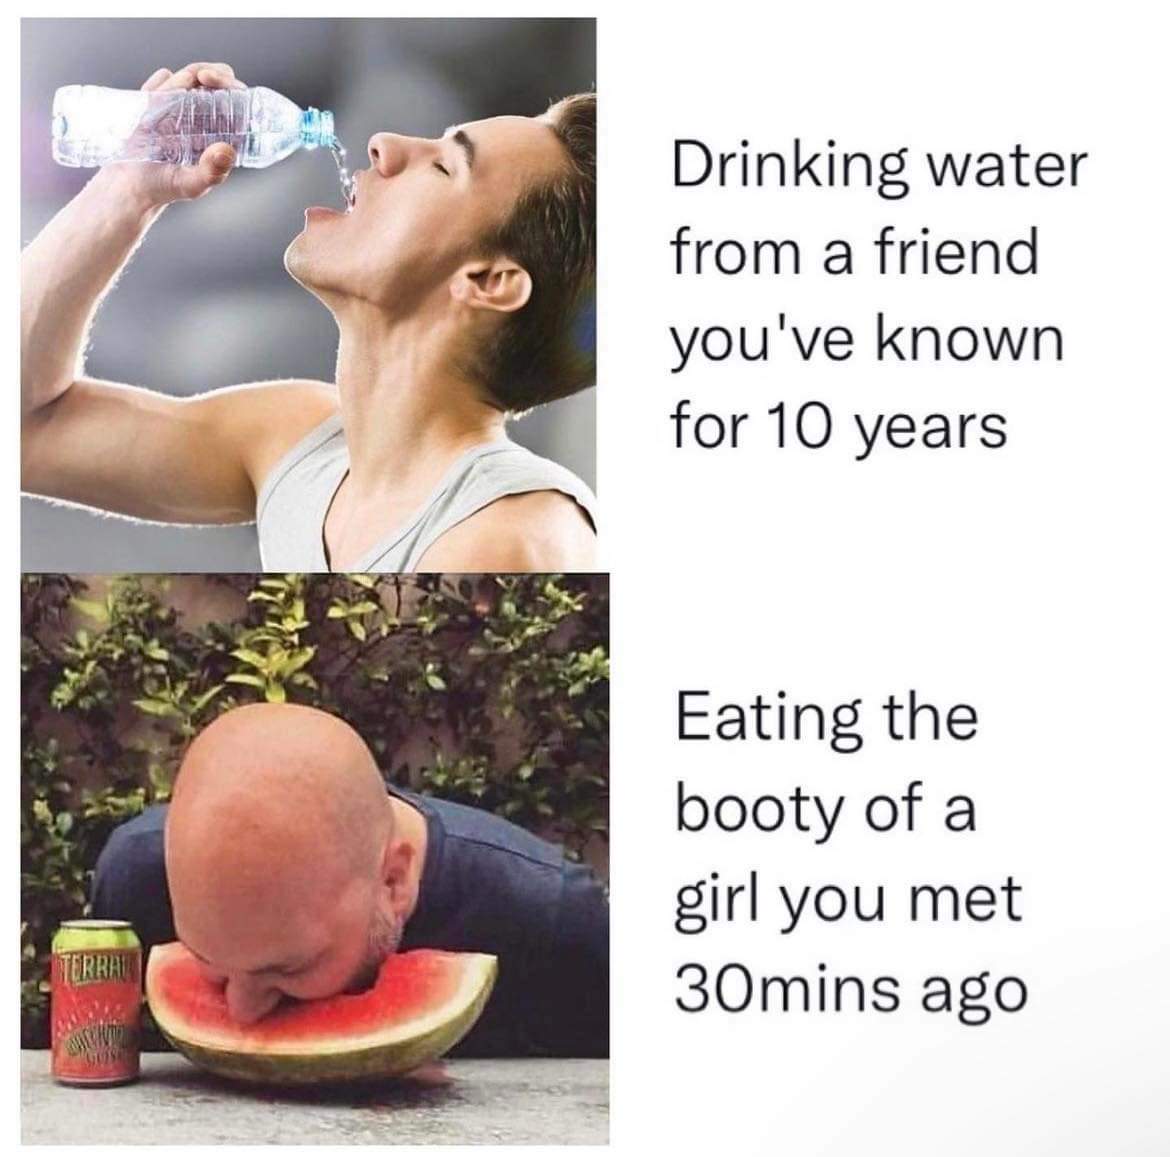 photo caption - Terral Hecht Drinking water from a friend you've known for 10 years Eating the booty of a girl you met 30mins ago